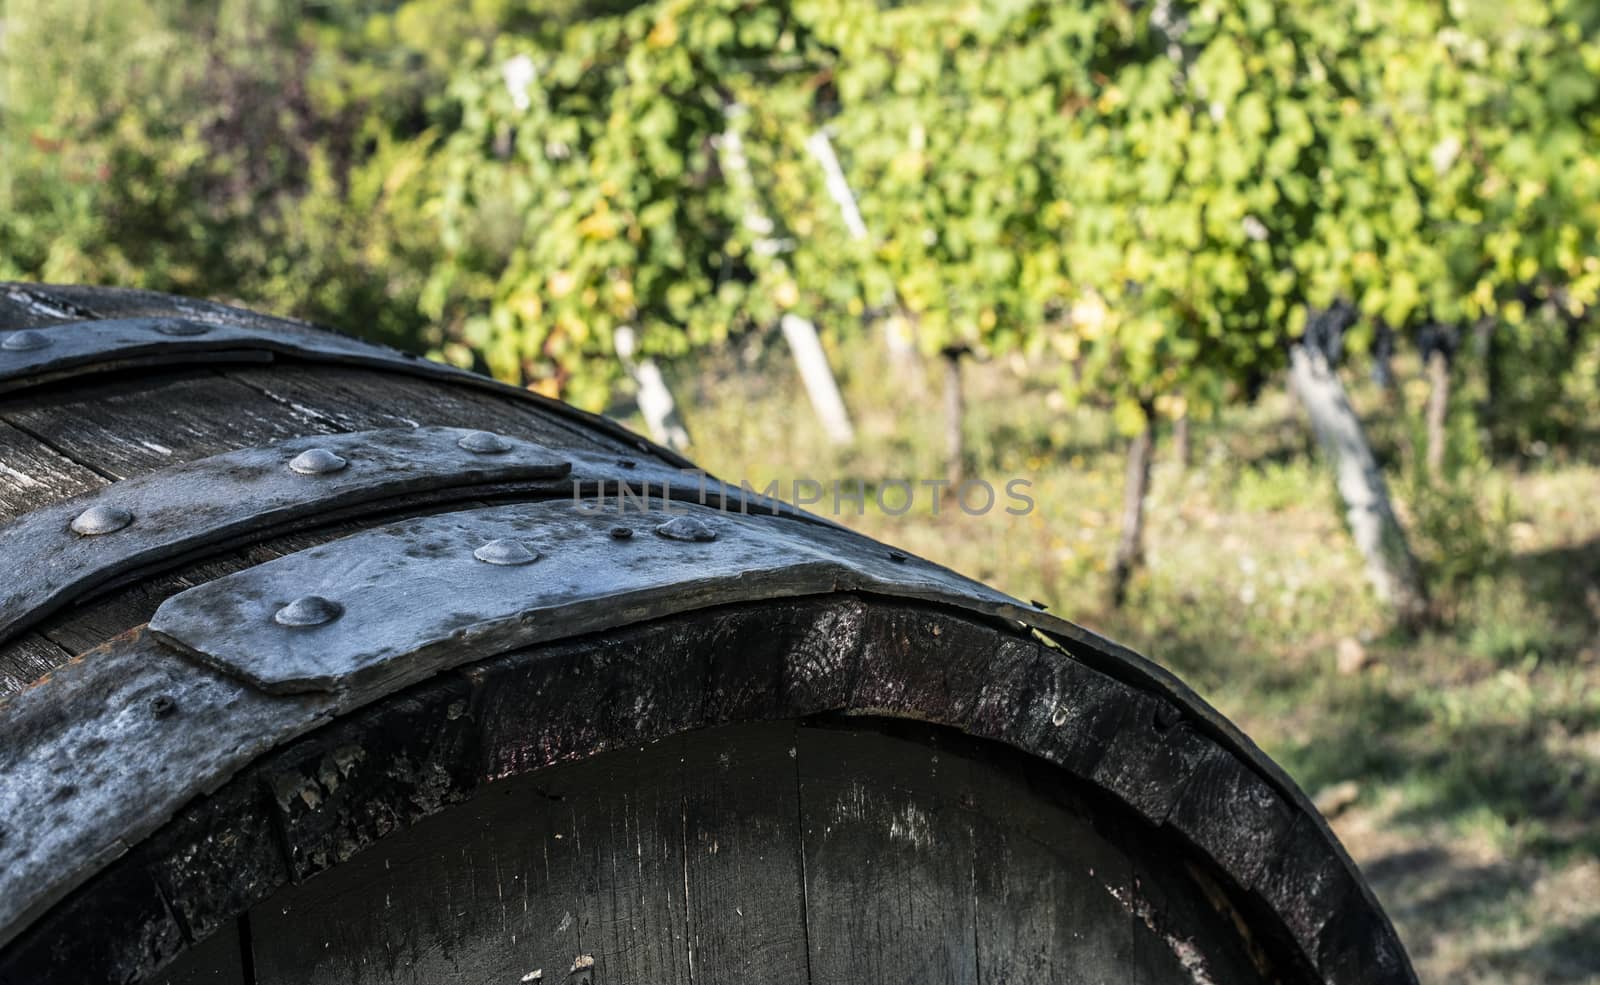 Vine valley, vineyards in rows on hill in Italy. An old wine barrel in the foreground